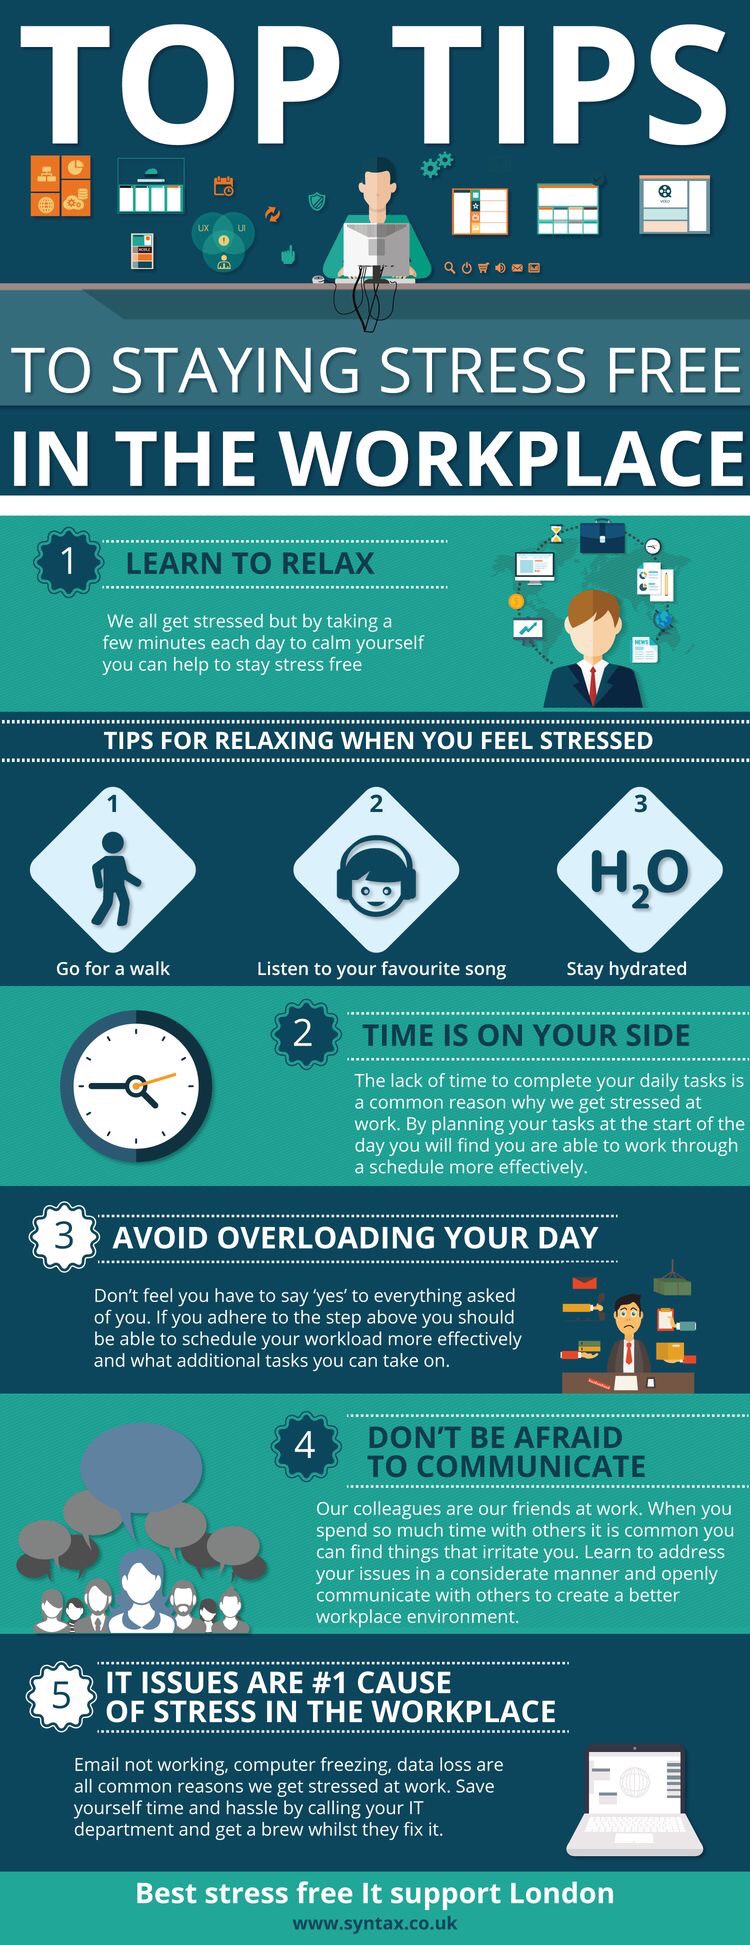 Top Tips to Staying Stress Free in the Work Place